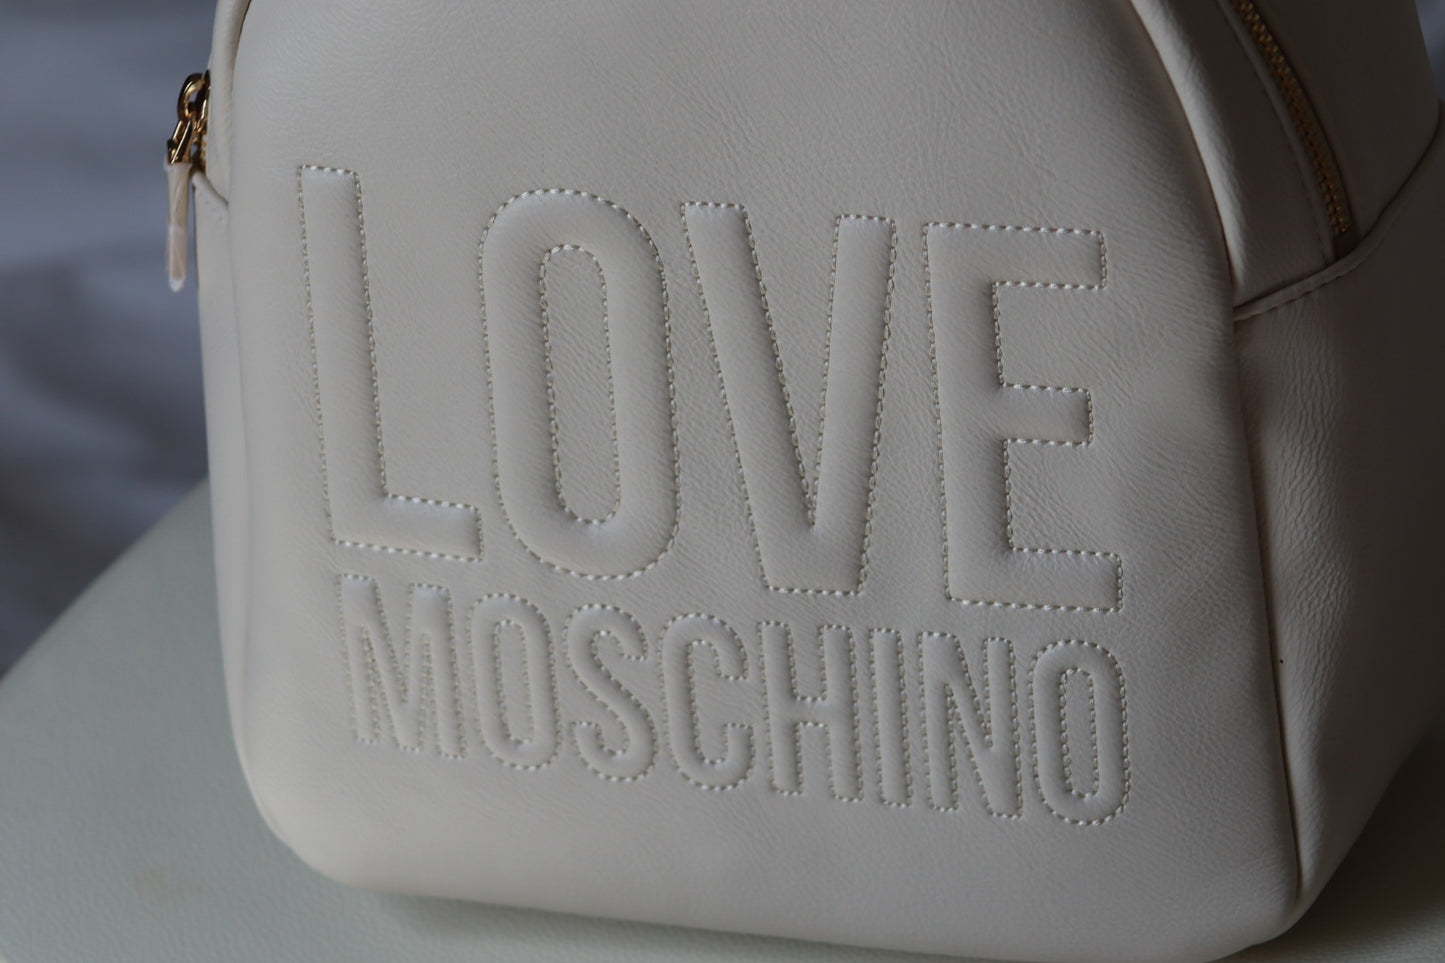 Backpack with Stitched Love Moschino Branding